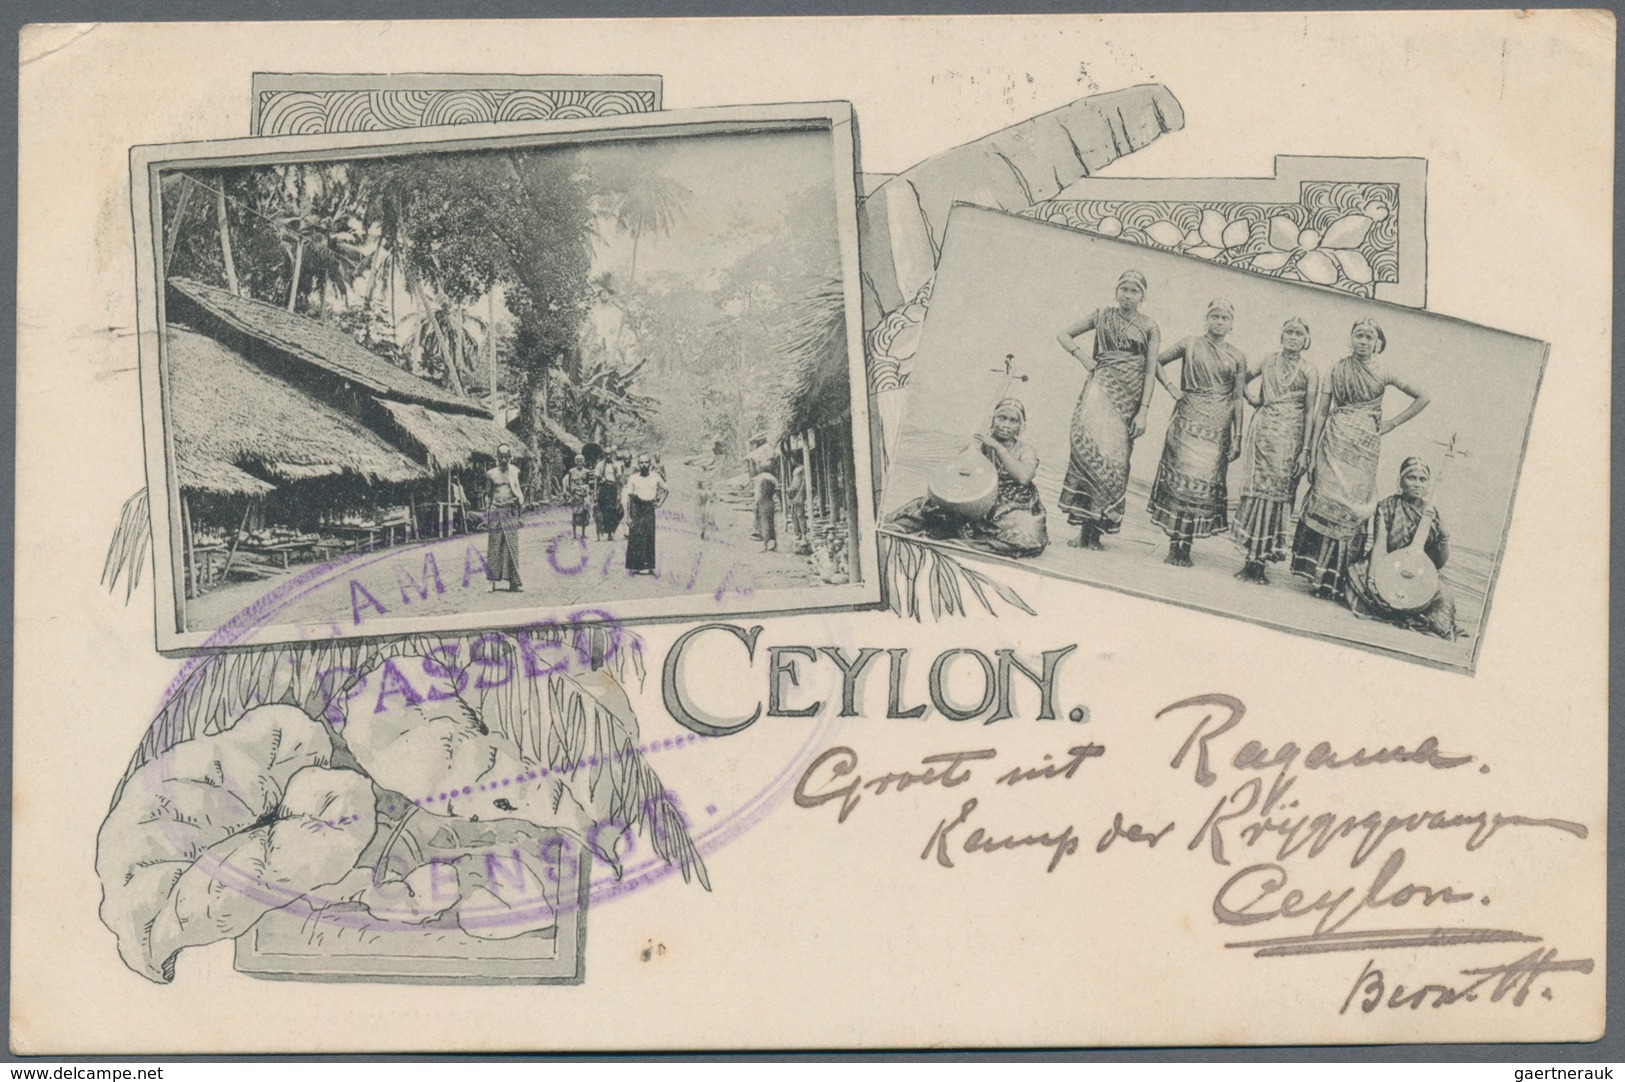 Ceylon / Sri Lanka: 1901-02 P.O.W. Mail: Collection of 74 picture postcards (almost all different) f